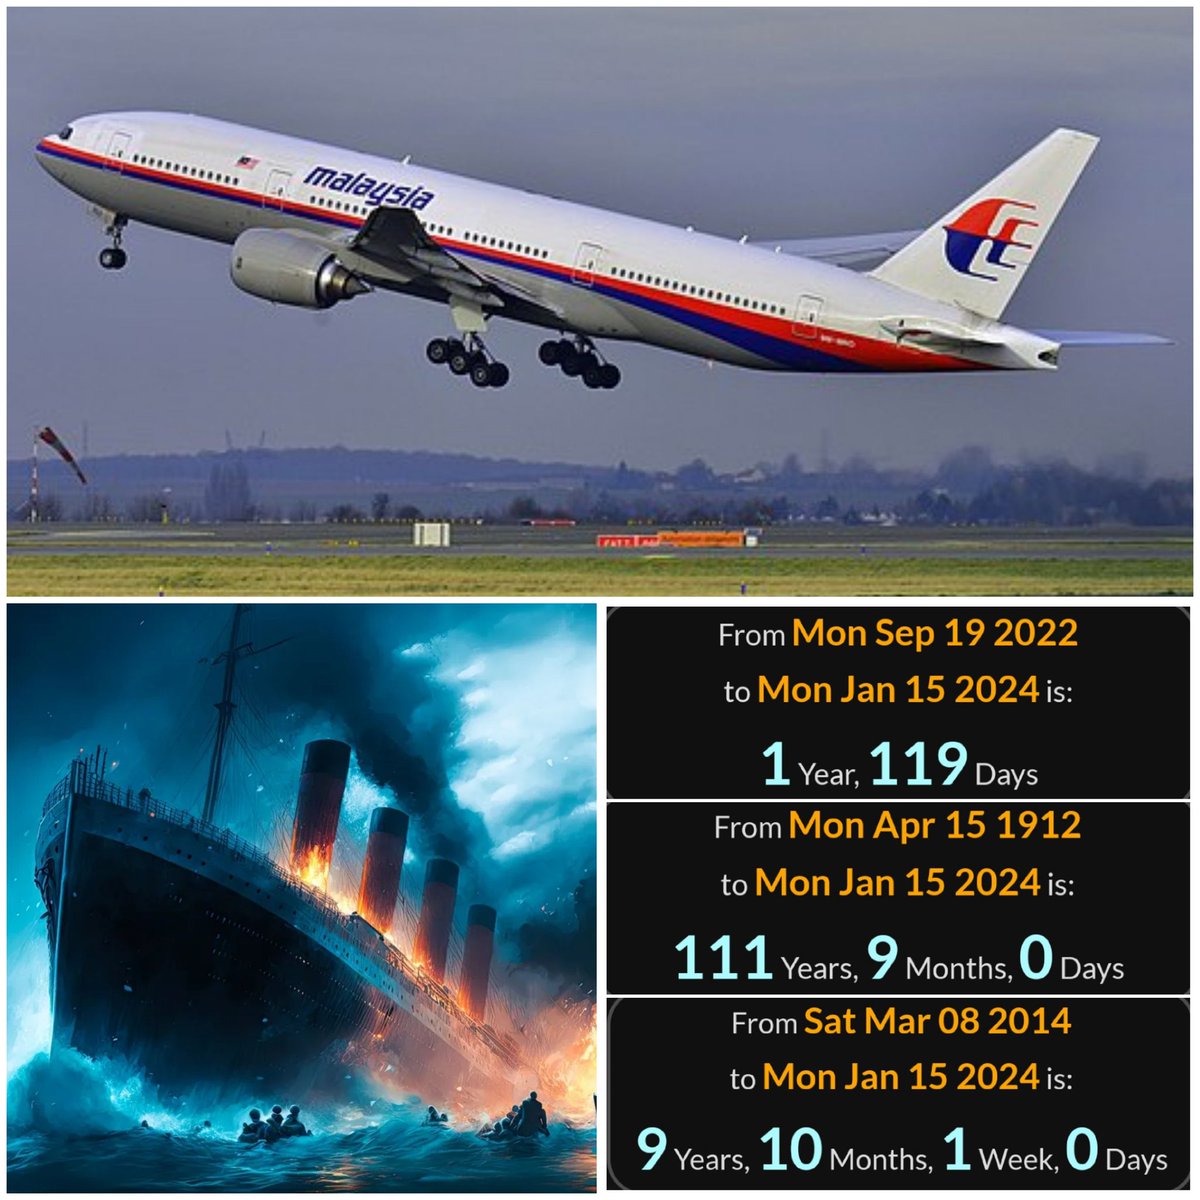 1/15/24 💥

Keep this one straight and simple thing..

Malaysia Airlines Flight 370 (MH370/MAS370) Missing 3/8/2014
9 years, 10 months, 1 week 💥

Titanic Sinks 4/15/1912
111 years, 9 months 💥

Queen Elizabeth Buried With Prince Philip 9/19/2022
1 year, 119 days 💥

#NineEleven